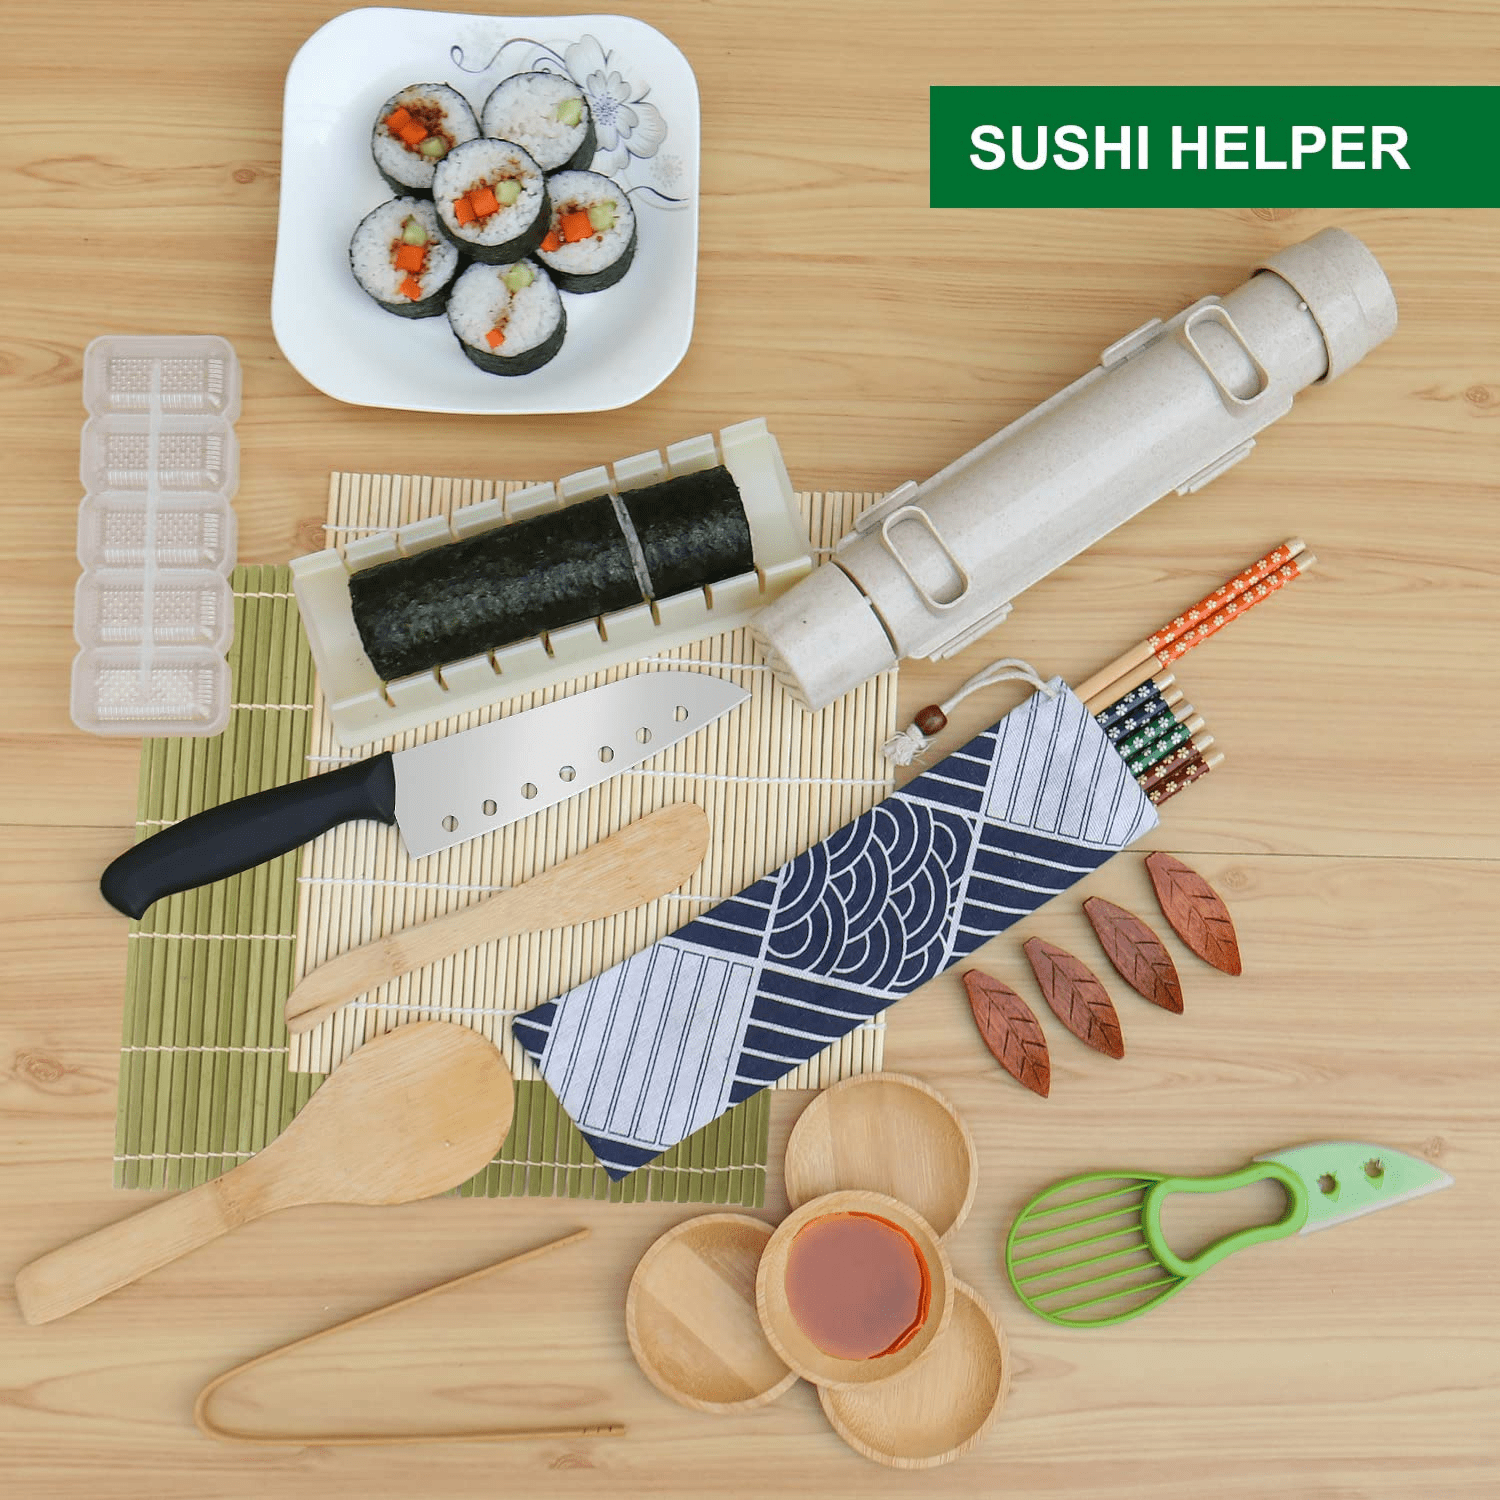 Tingor 13-in-1 Sushi Making Kit, Sushi Bazooker Maker Set, Sushi Tools Accessories for Home Kitchen, Size: 12.4x6x2.8in